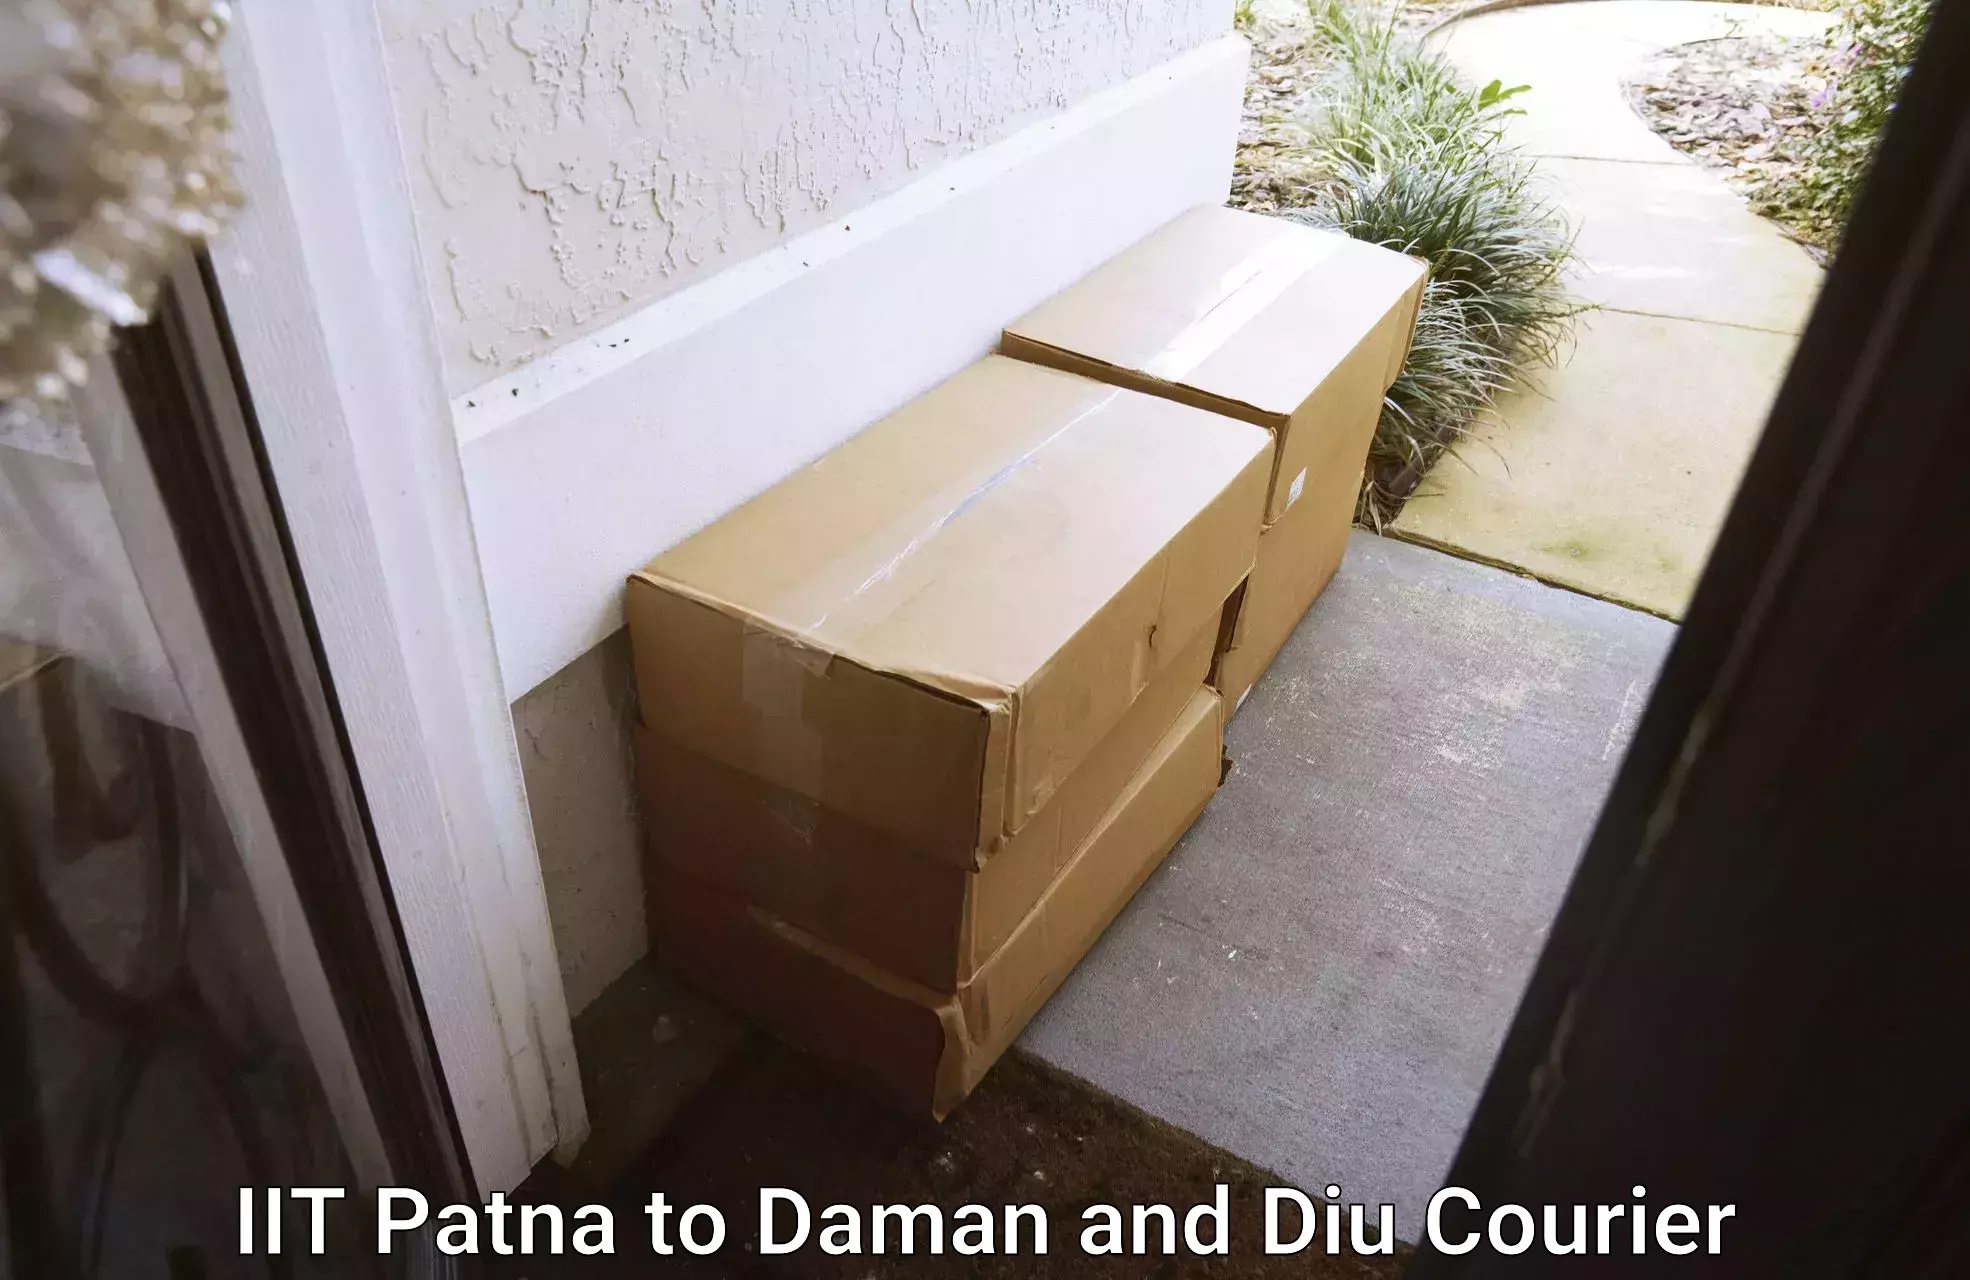 Efficient packing services IIT Patna to Diu